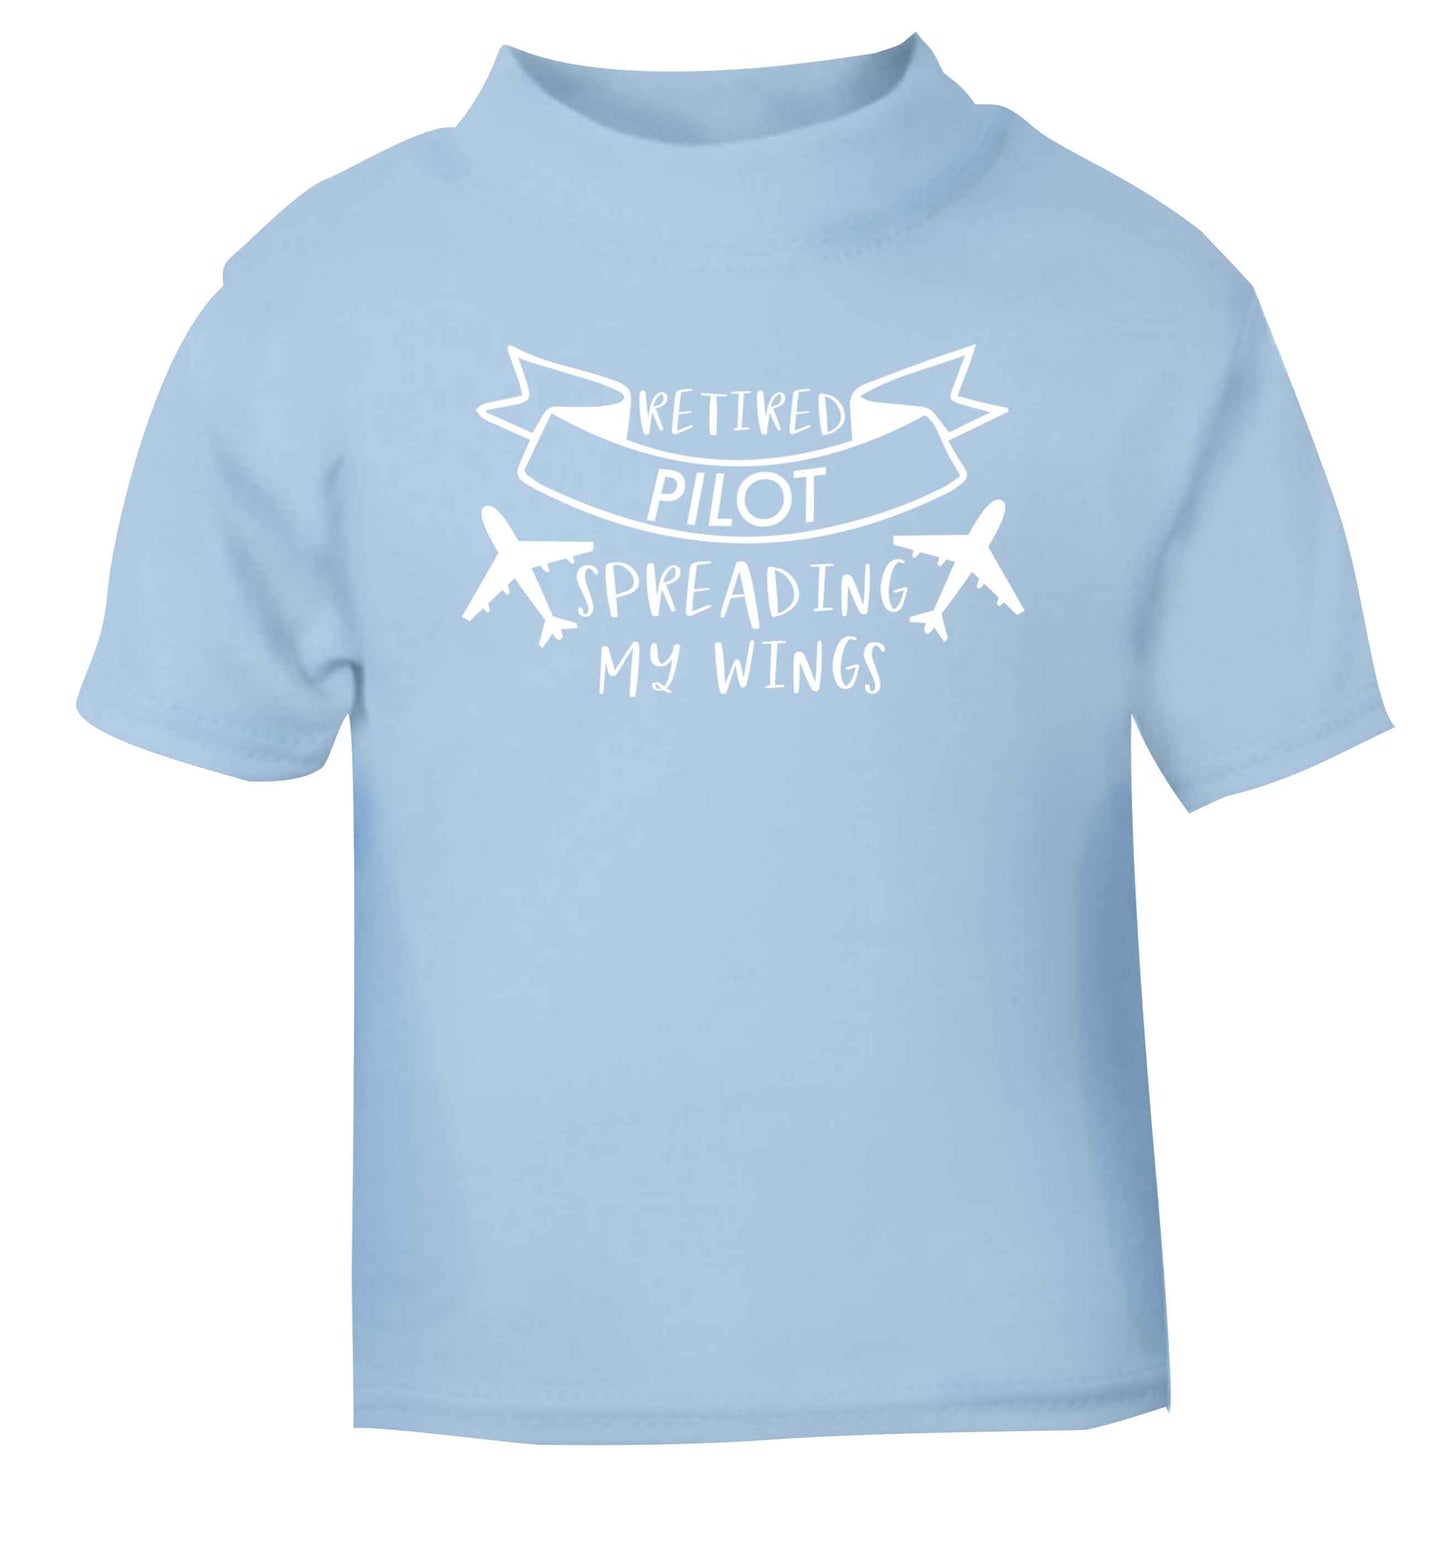 Retired pilot spreading my wings light blue Baby Toddler Tshirt 2 Years